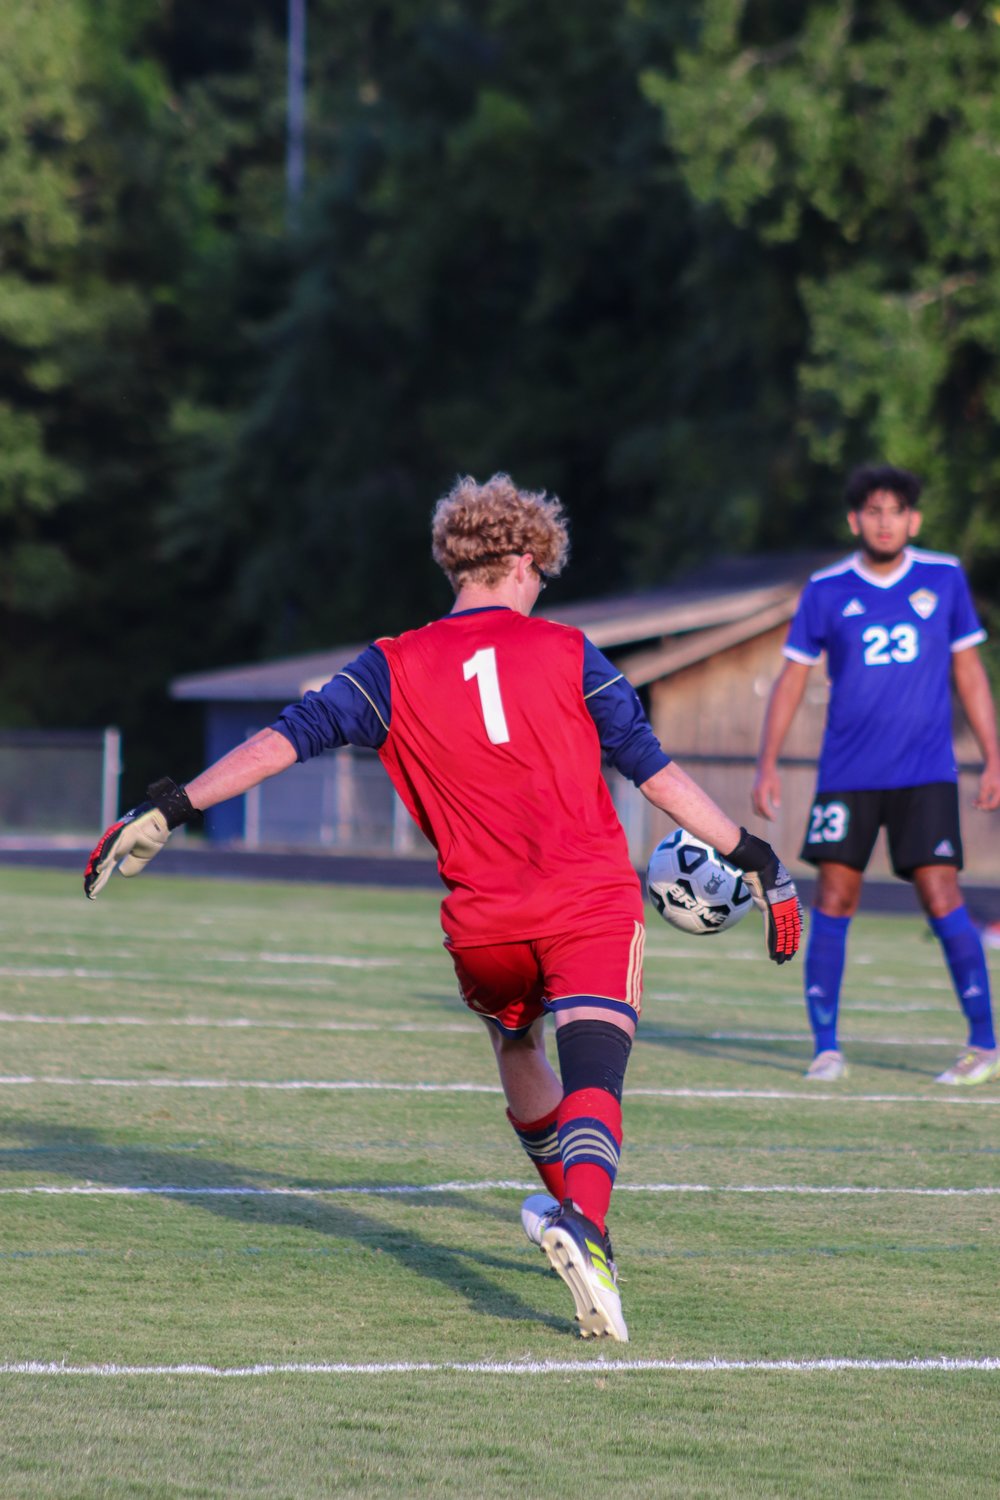 Northwood goalkeeper Jay Callis (1) punts the ball in his team's 4-1 loss to Jordan-Matthews last Thursday in Siler City. Callis made 10 saves on the night for the Chargers.